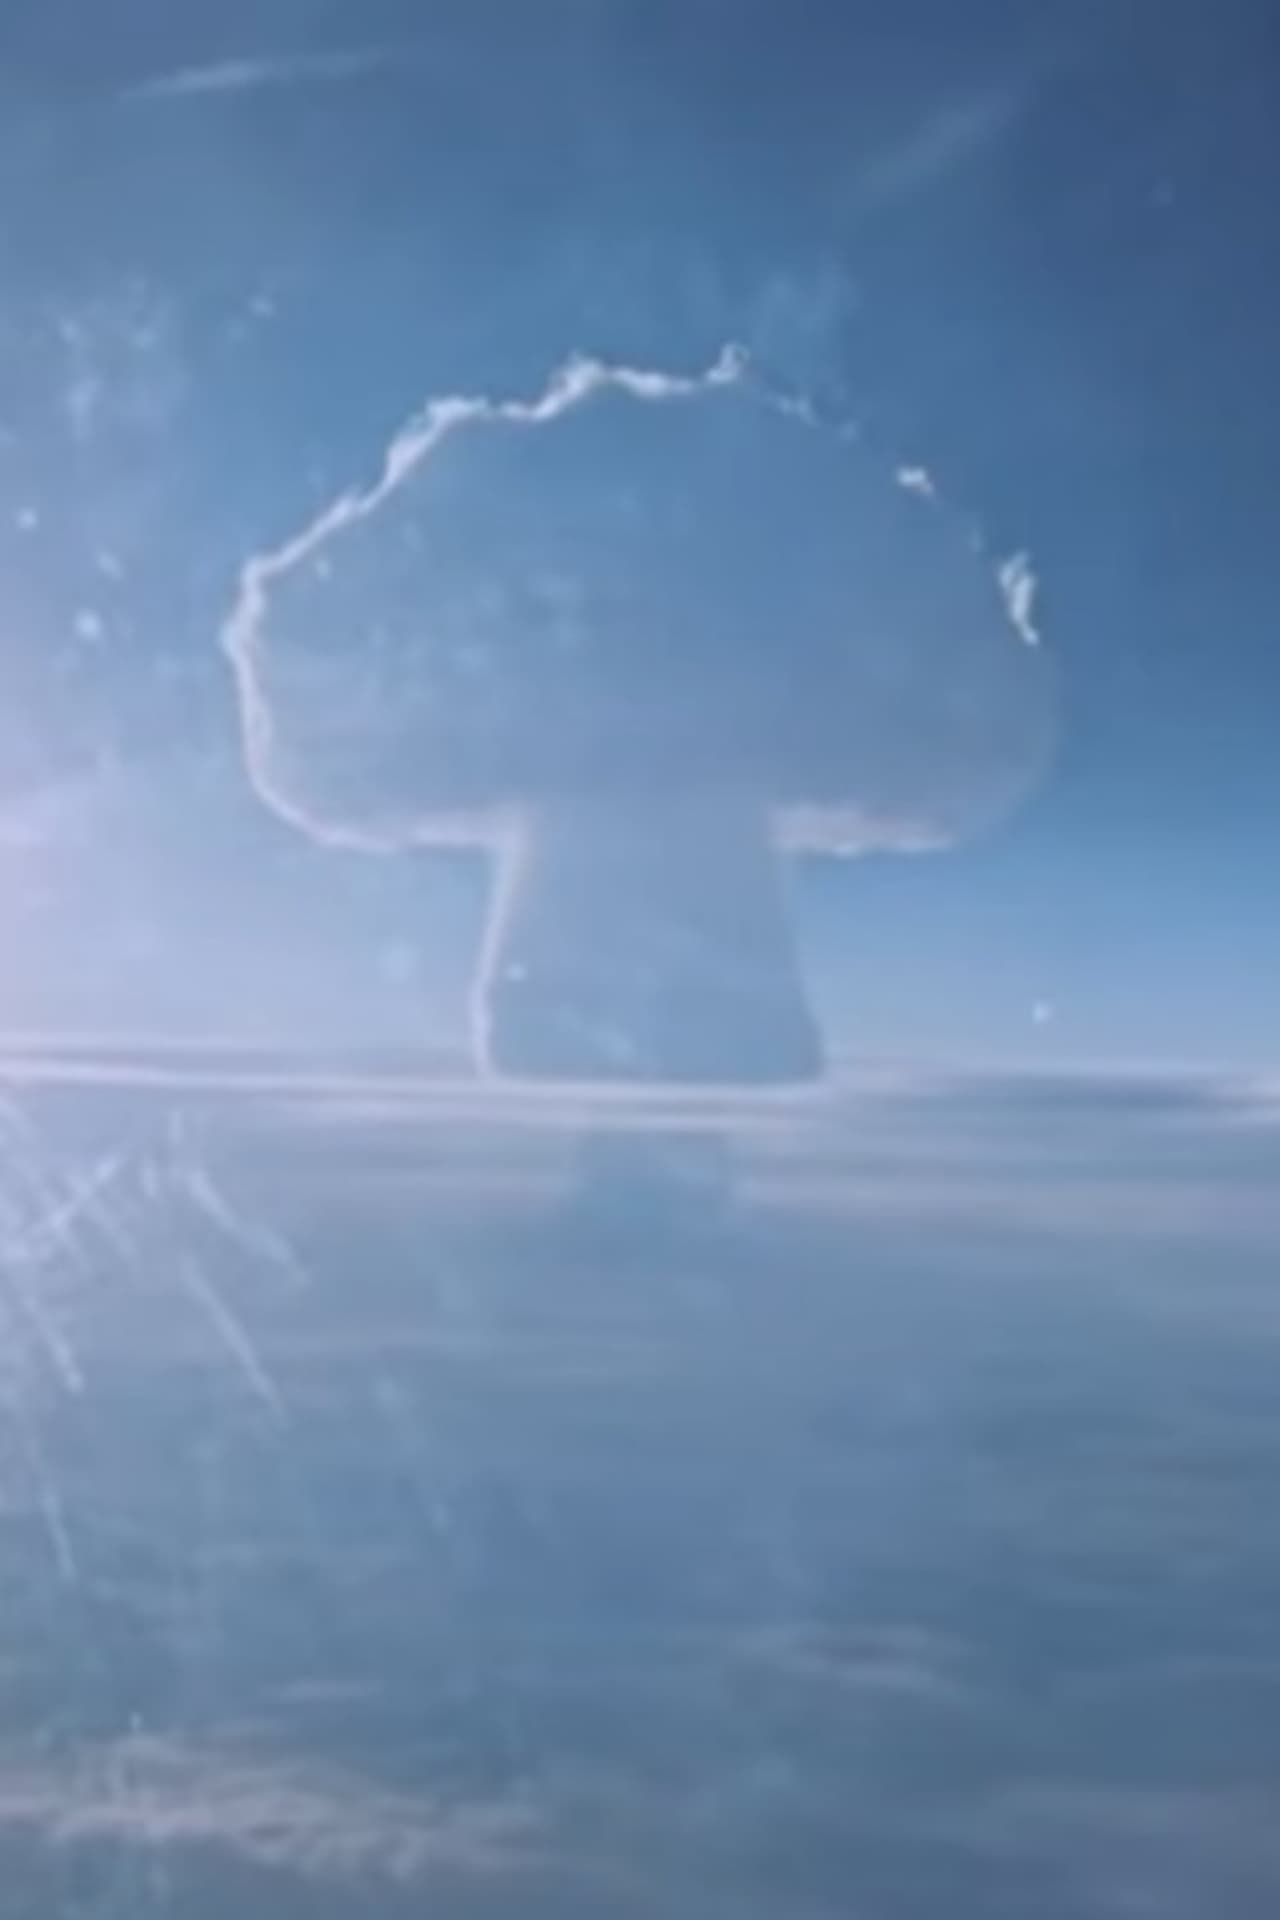 Test of a clean hydrogen bomb with a yield of 50 megatons